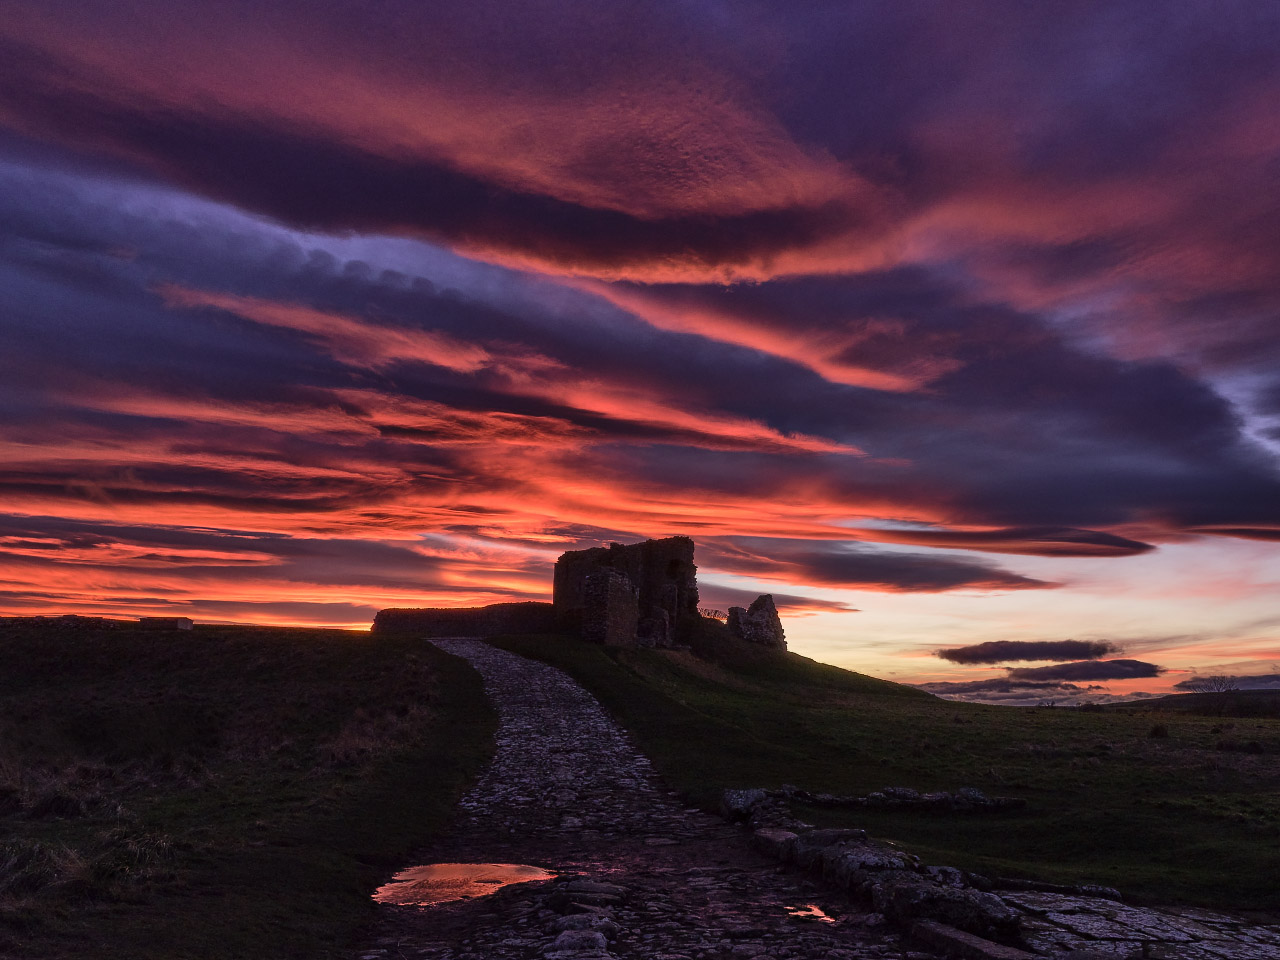 The Red Road - Duffus Castle